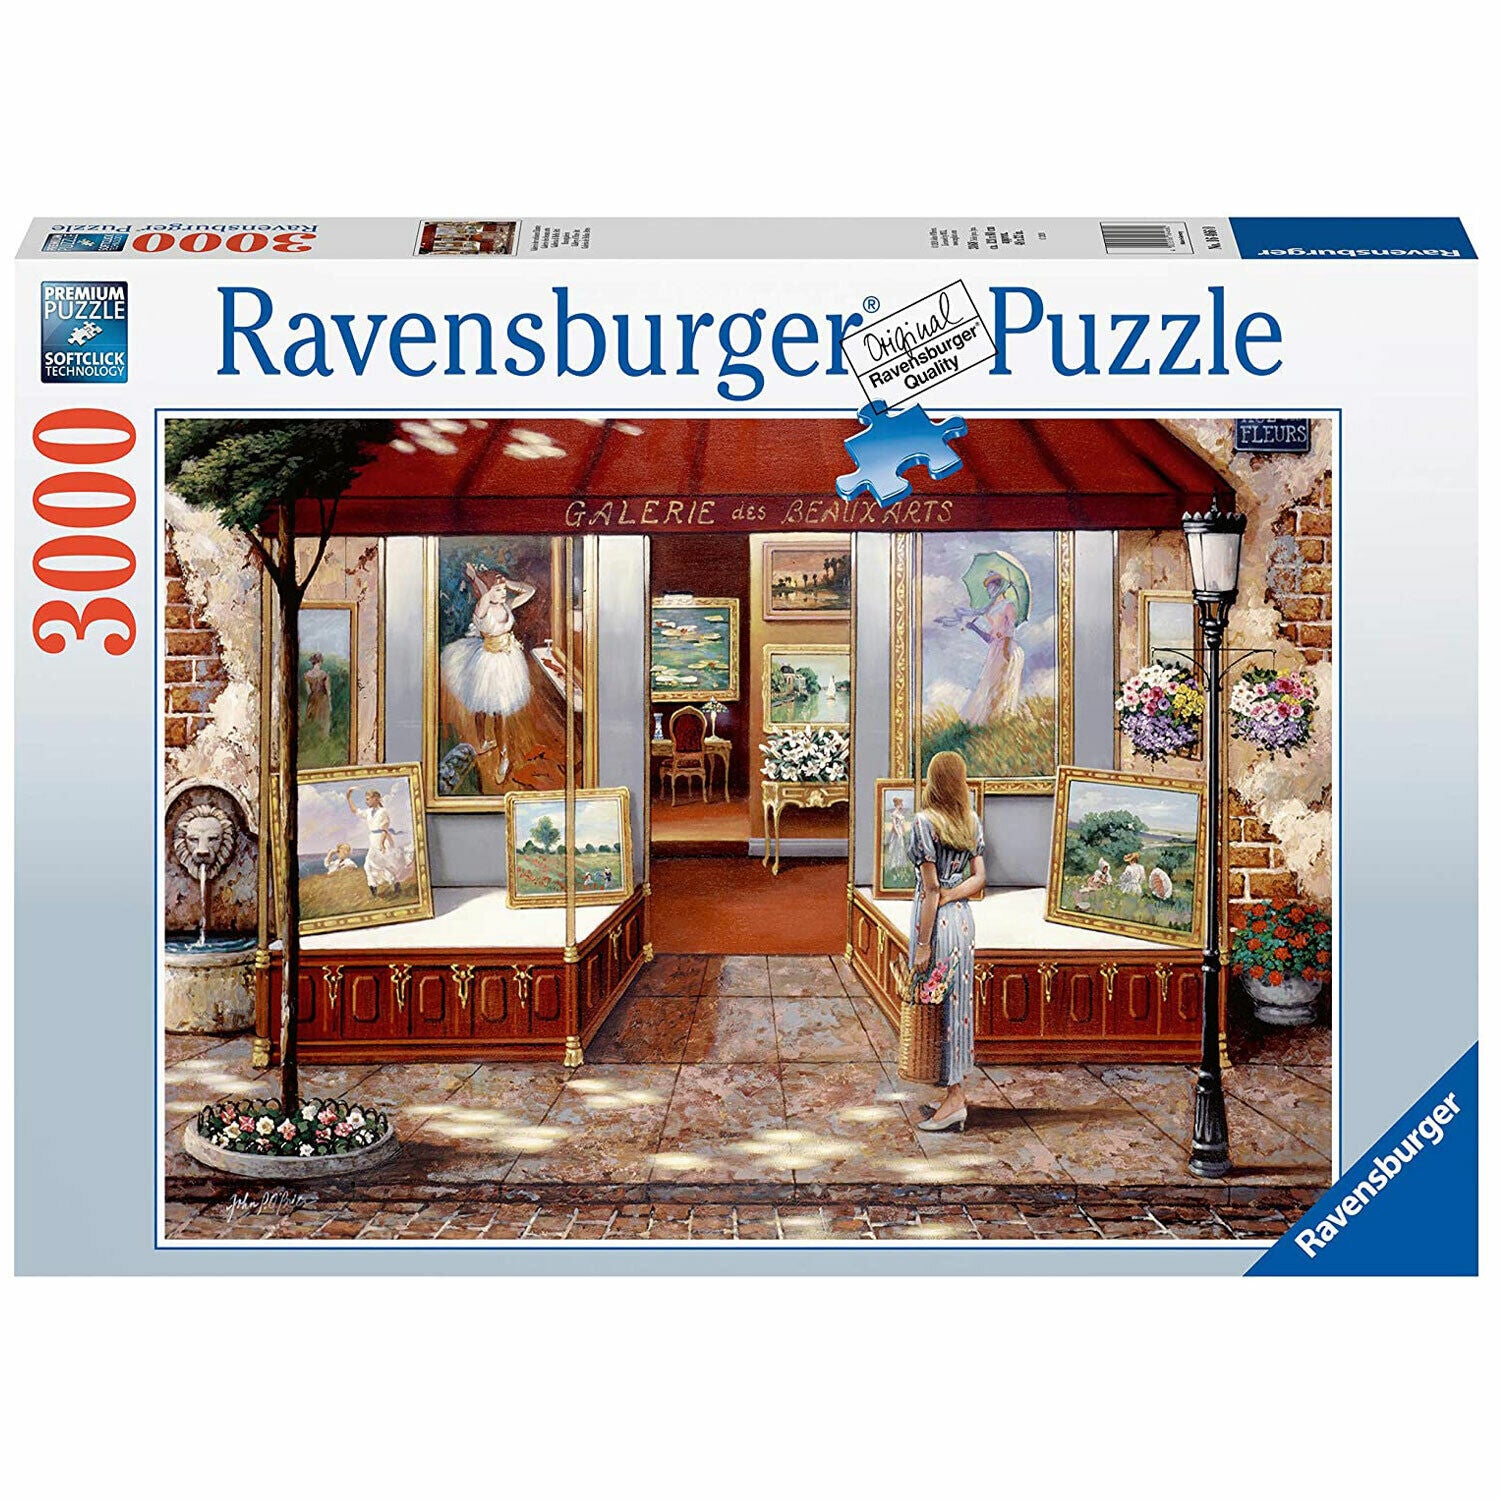 Ravensburger Gallery of Fine Arts 3000pc Puzzle BRAND NEW